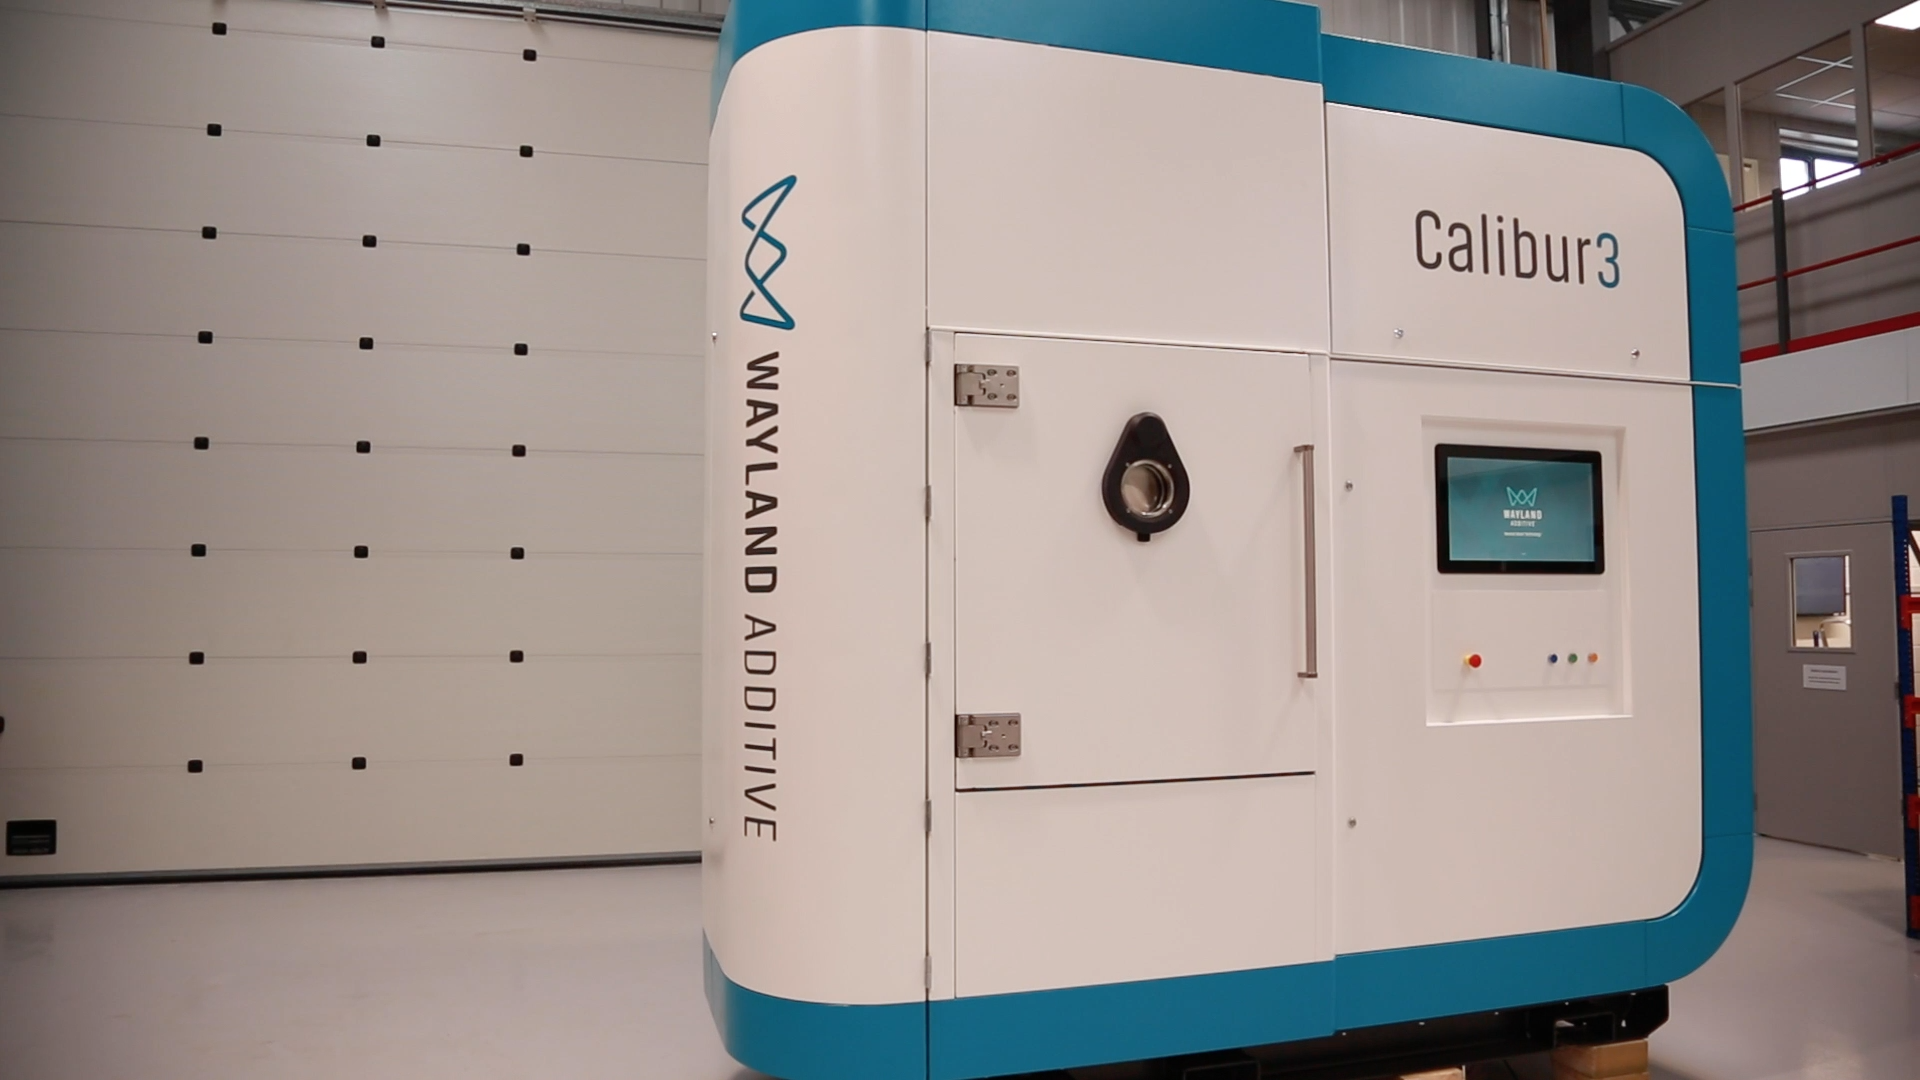 Wayland Additive Launches Calibur3 Metal Additive Manufacturing System